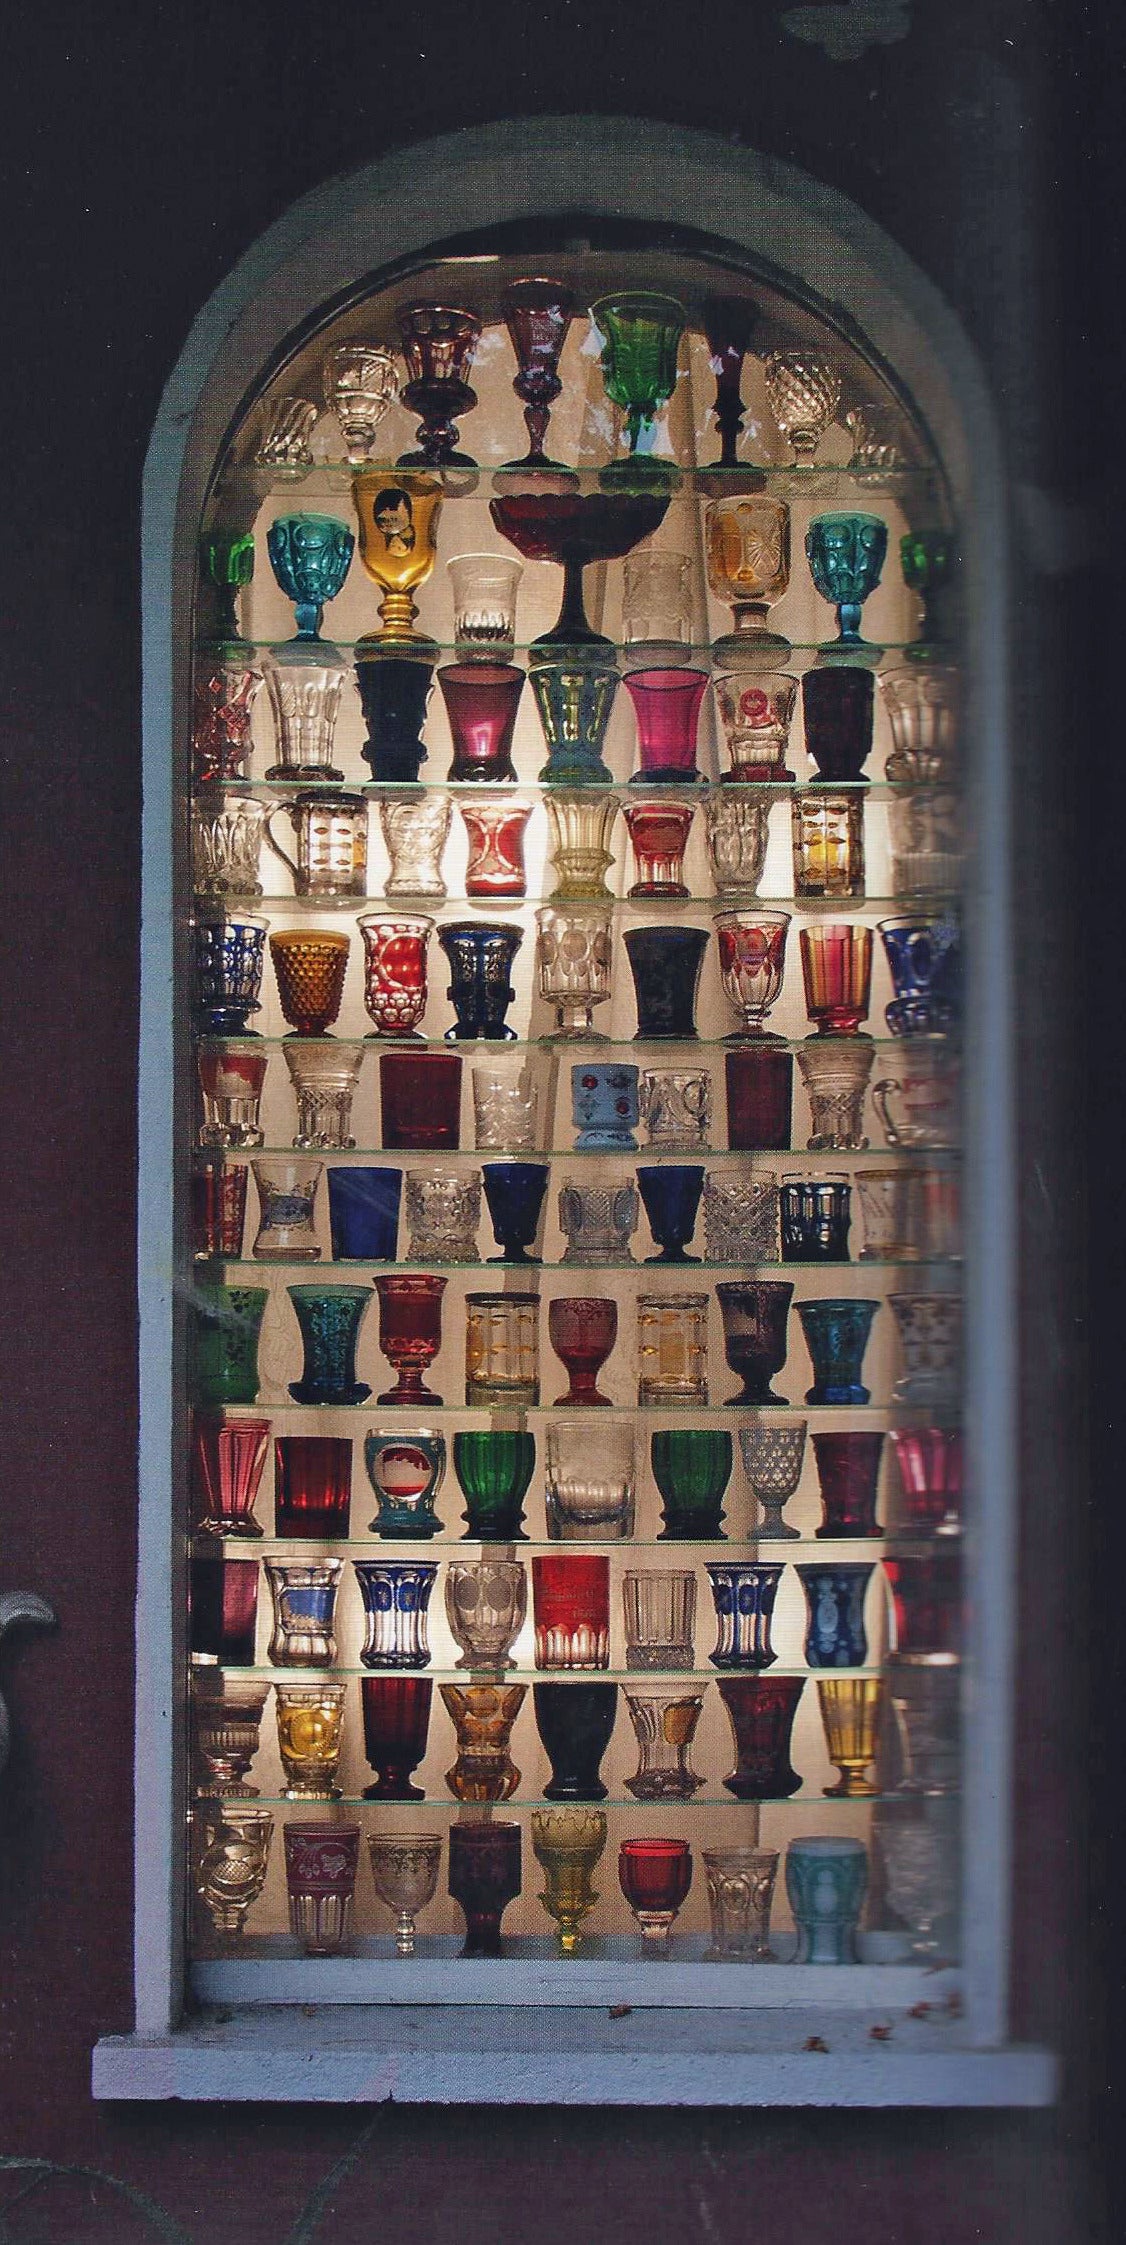 Piero Fornasetti's Bicchieri di Boemia pattern- Bohemian glass pattern found on this lovely metal tray is decorated with different polychrome antique Bohemian drinking glasses. Below see a photograph of a group of Bohemian glasses in Piero